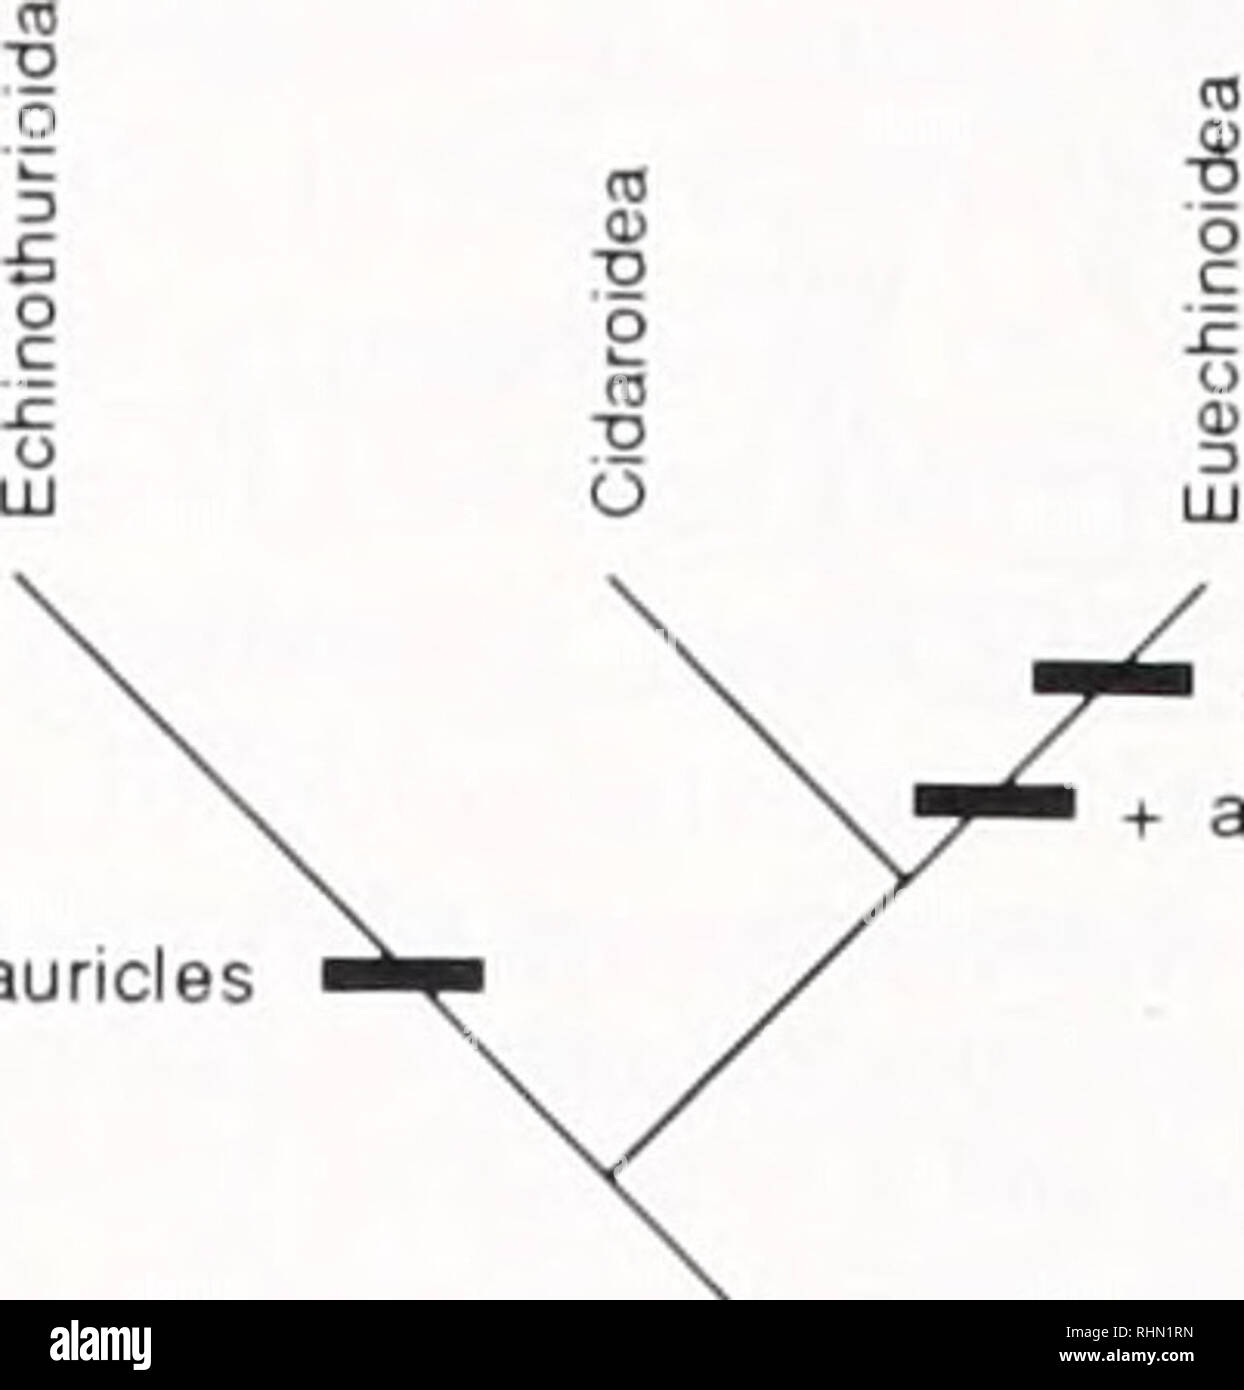 . The Biological bulletin. Biology; Zoology; Biology; Marine Biology. + auricles Figure 10. Echinoid phylogeny. The three possible phylogenetic relationships between cidaroids, echi- nothurioids, and nonechinothurioid euechinoids are shown. The states of two characters are noted in each case: presence of a vestibule during metamorphosis and the nature of lantern supports. Here we assume that the ancestor of post-Paleozoic echmoids lacked a vestibule and possessed cidaroid-type lantern supports. Acquisition of a vestibule and of lantern supports attached to ambulacral rows (euechinoid-type) are Stock Photo